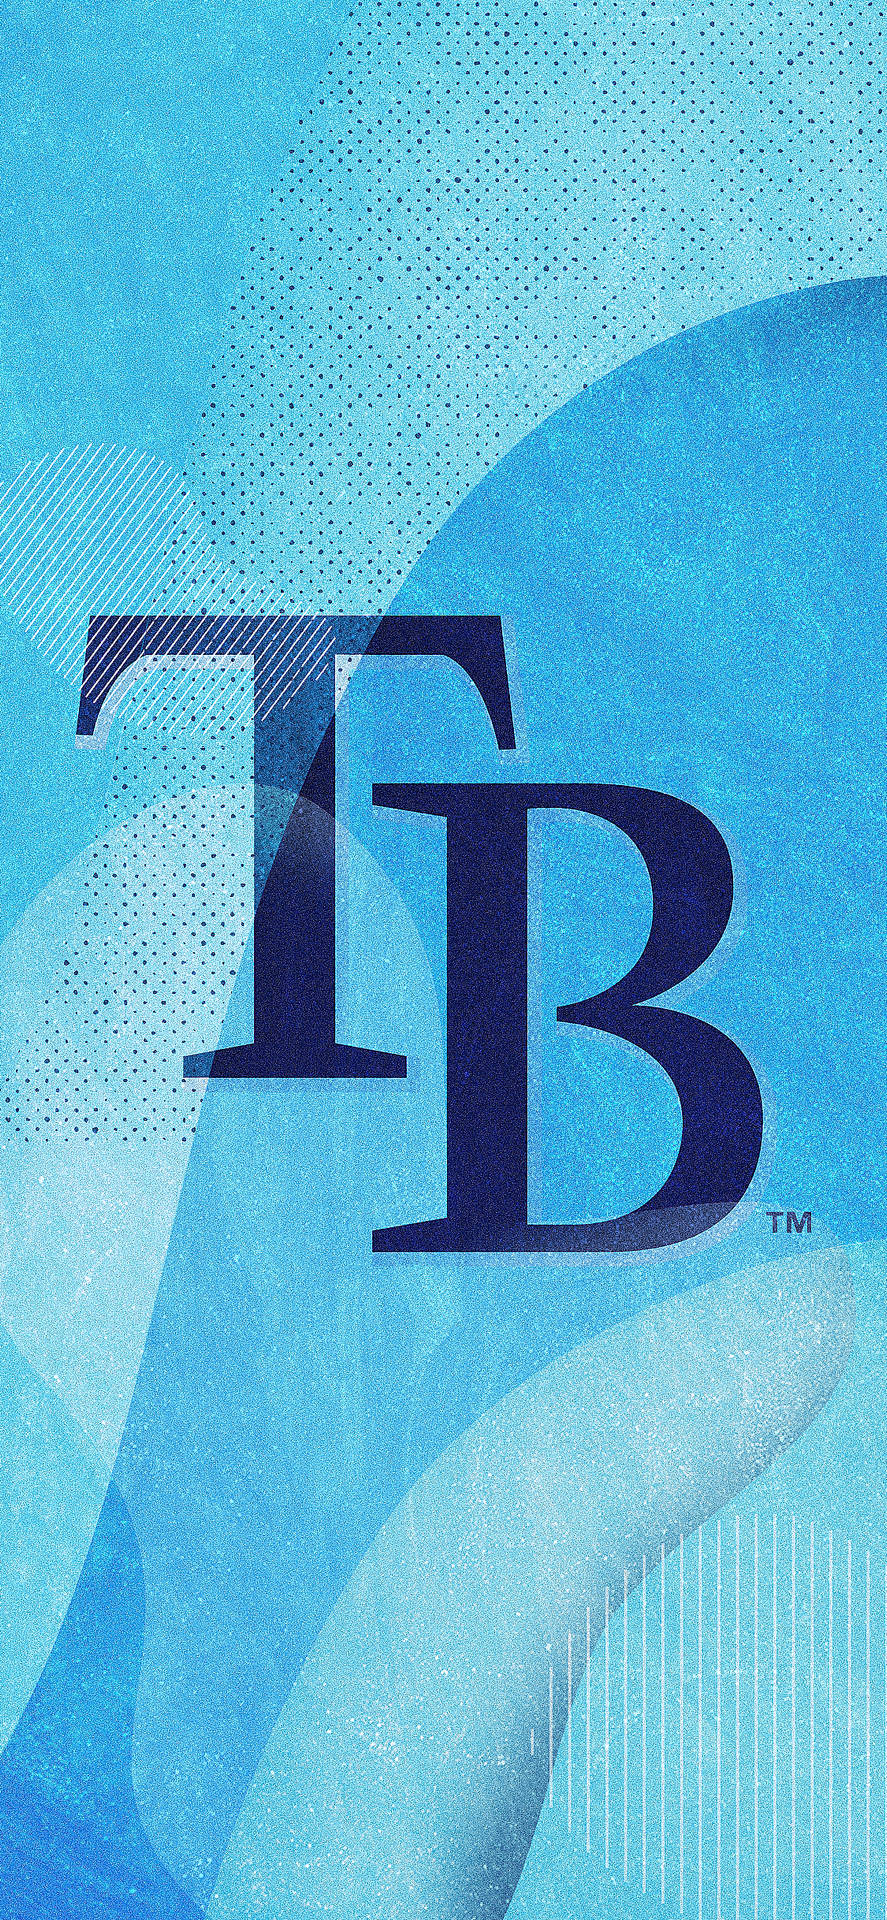 Tampa Bay Rays 'tb' Graphic